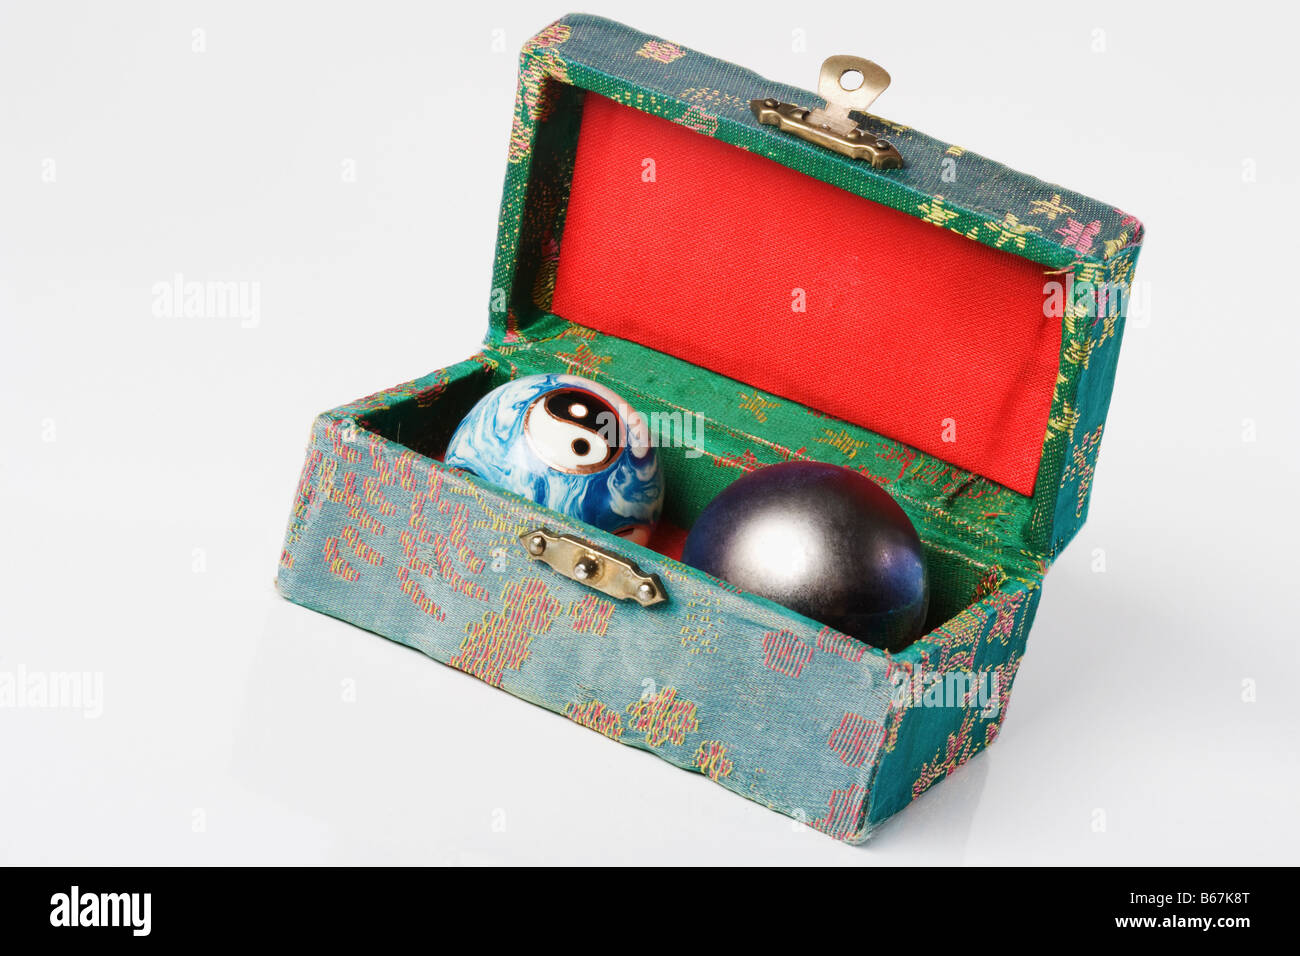 Close-up of a yin yang ball with a qigong ball in a box Stock Photo